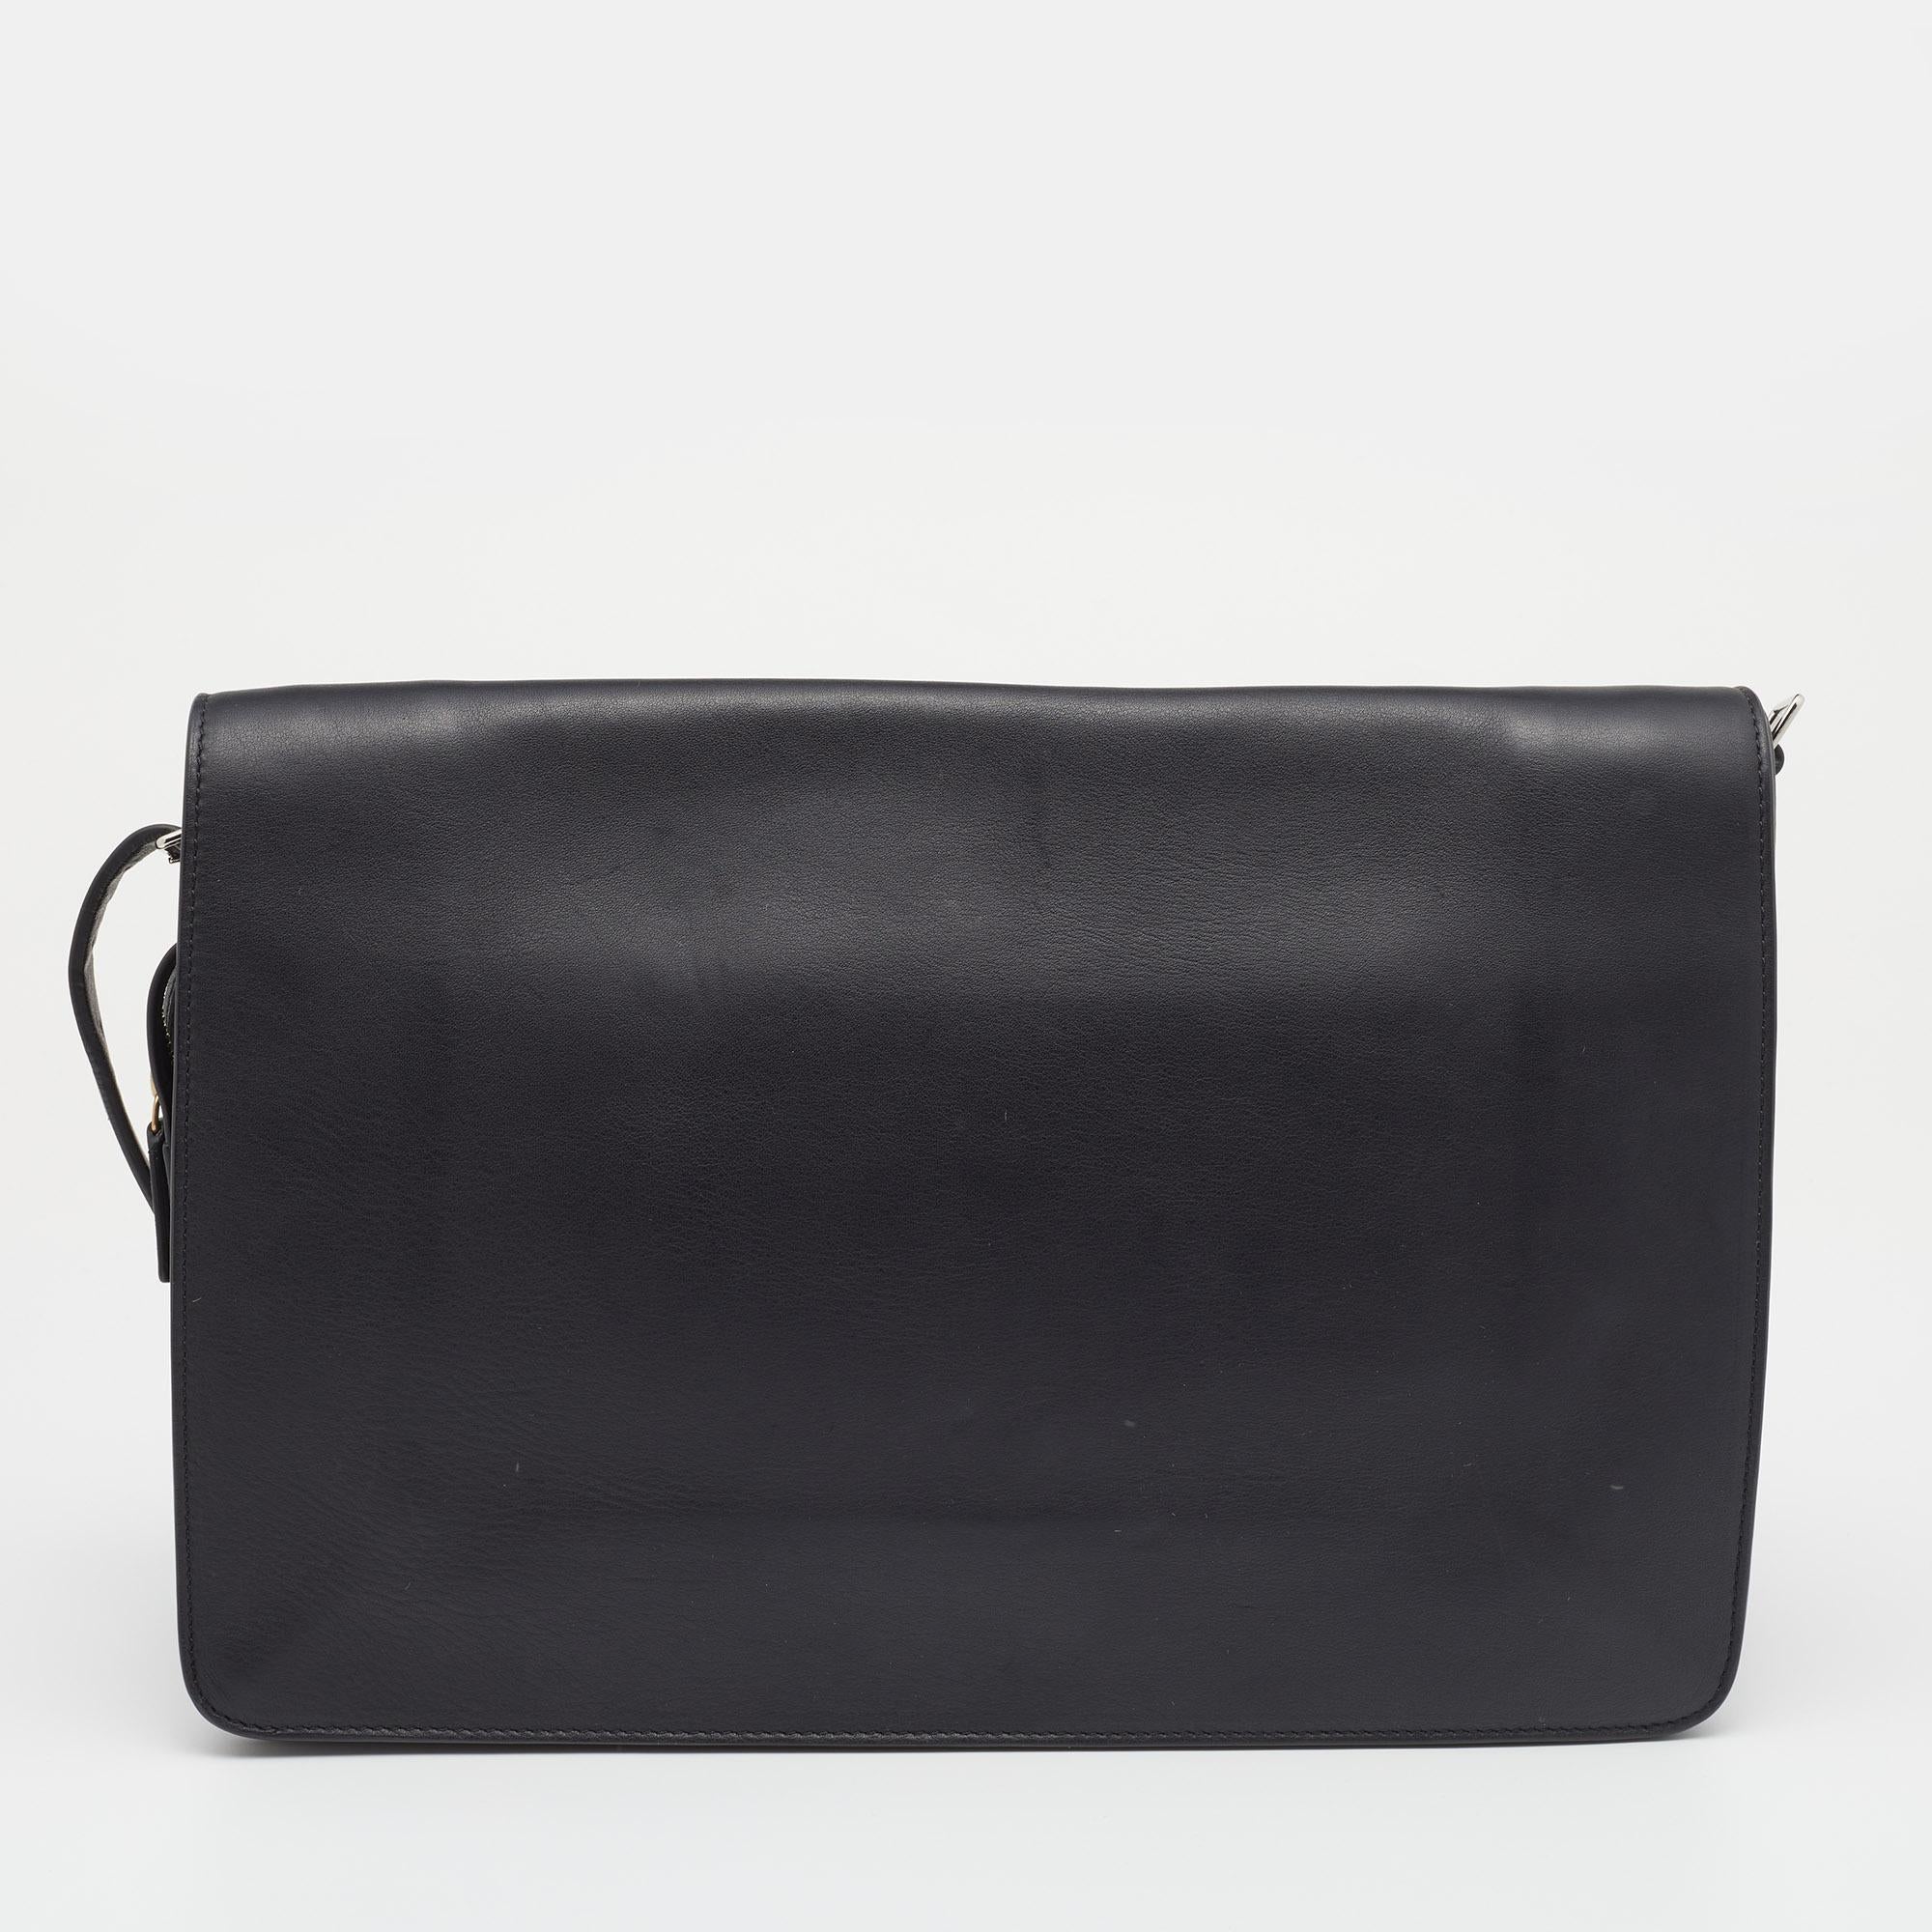 This stylish and effortless shoulder bag hails from the house of Celine. It has been crafted from quality leather and comes in a black shade. It has enough space for your essentials and is finished impeccably with gold-tone hardware.

Includes: